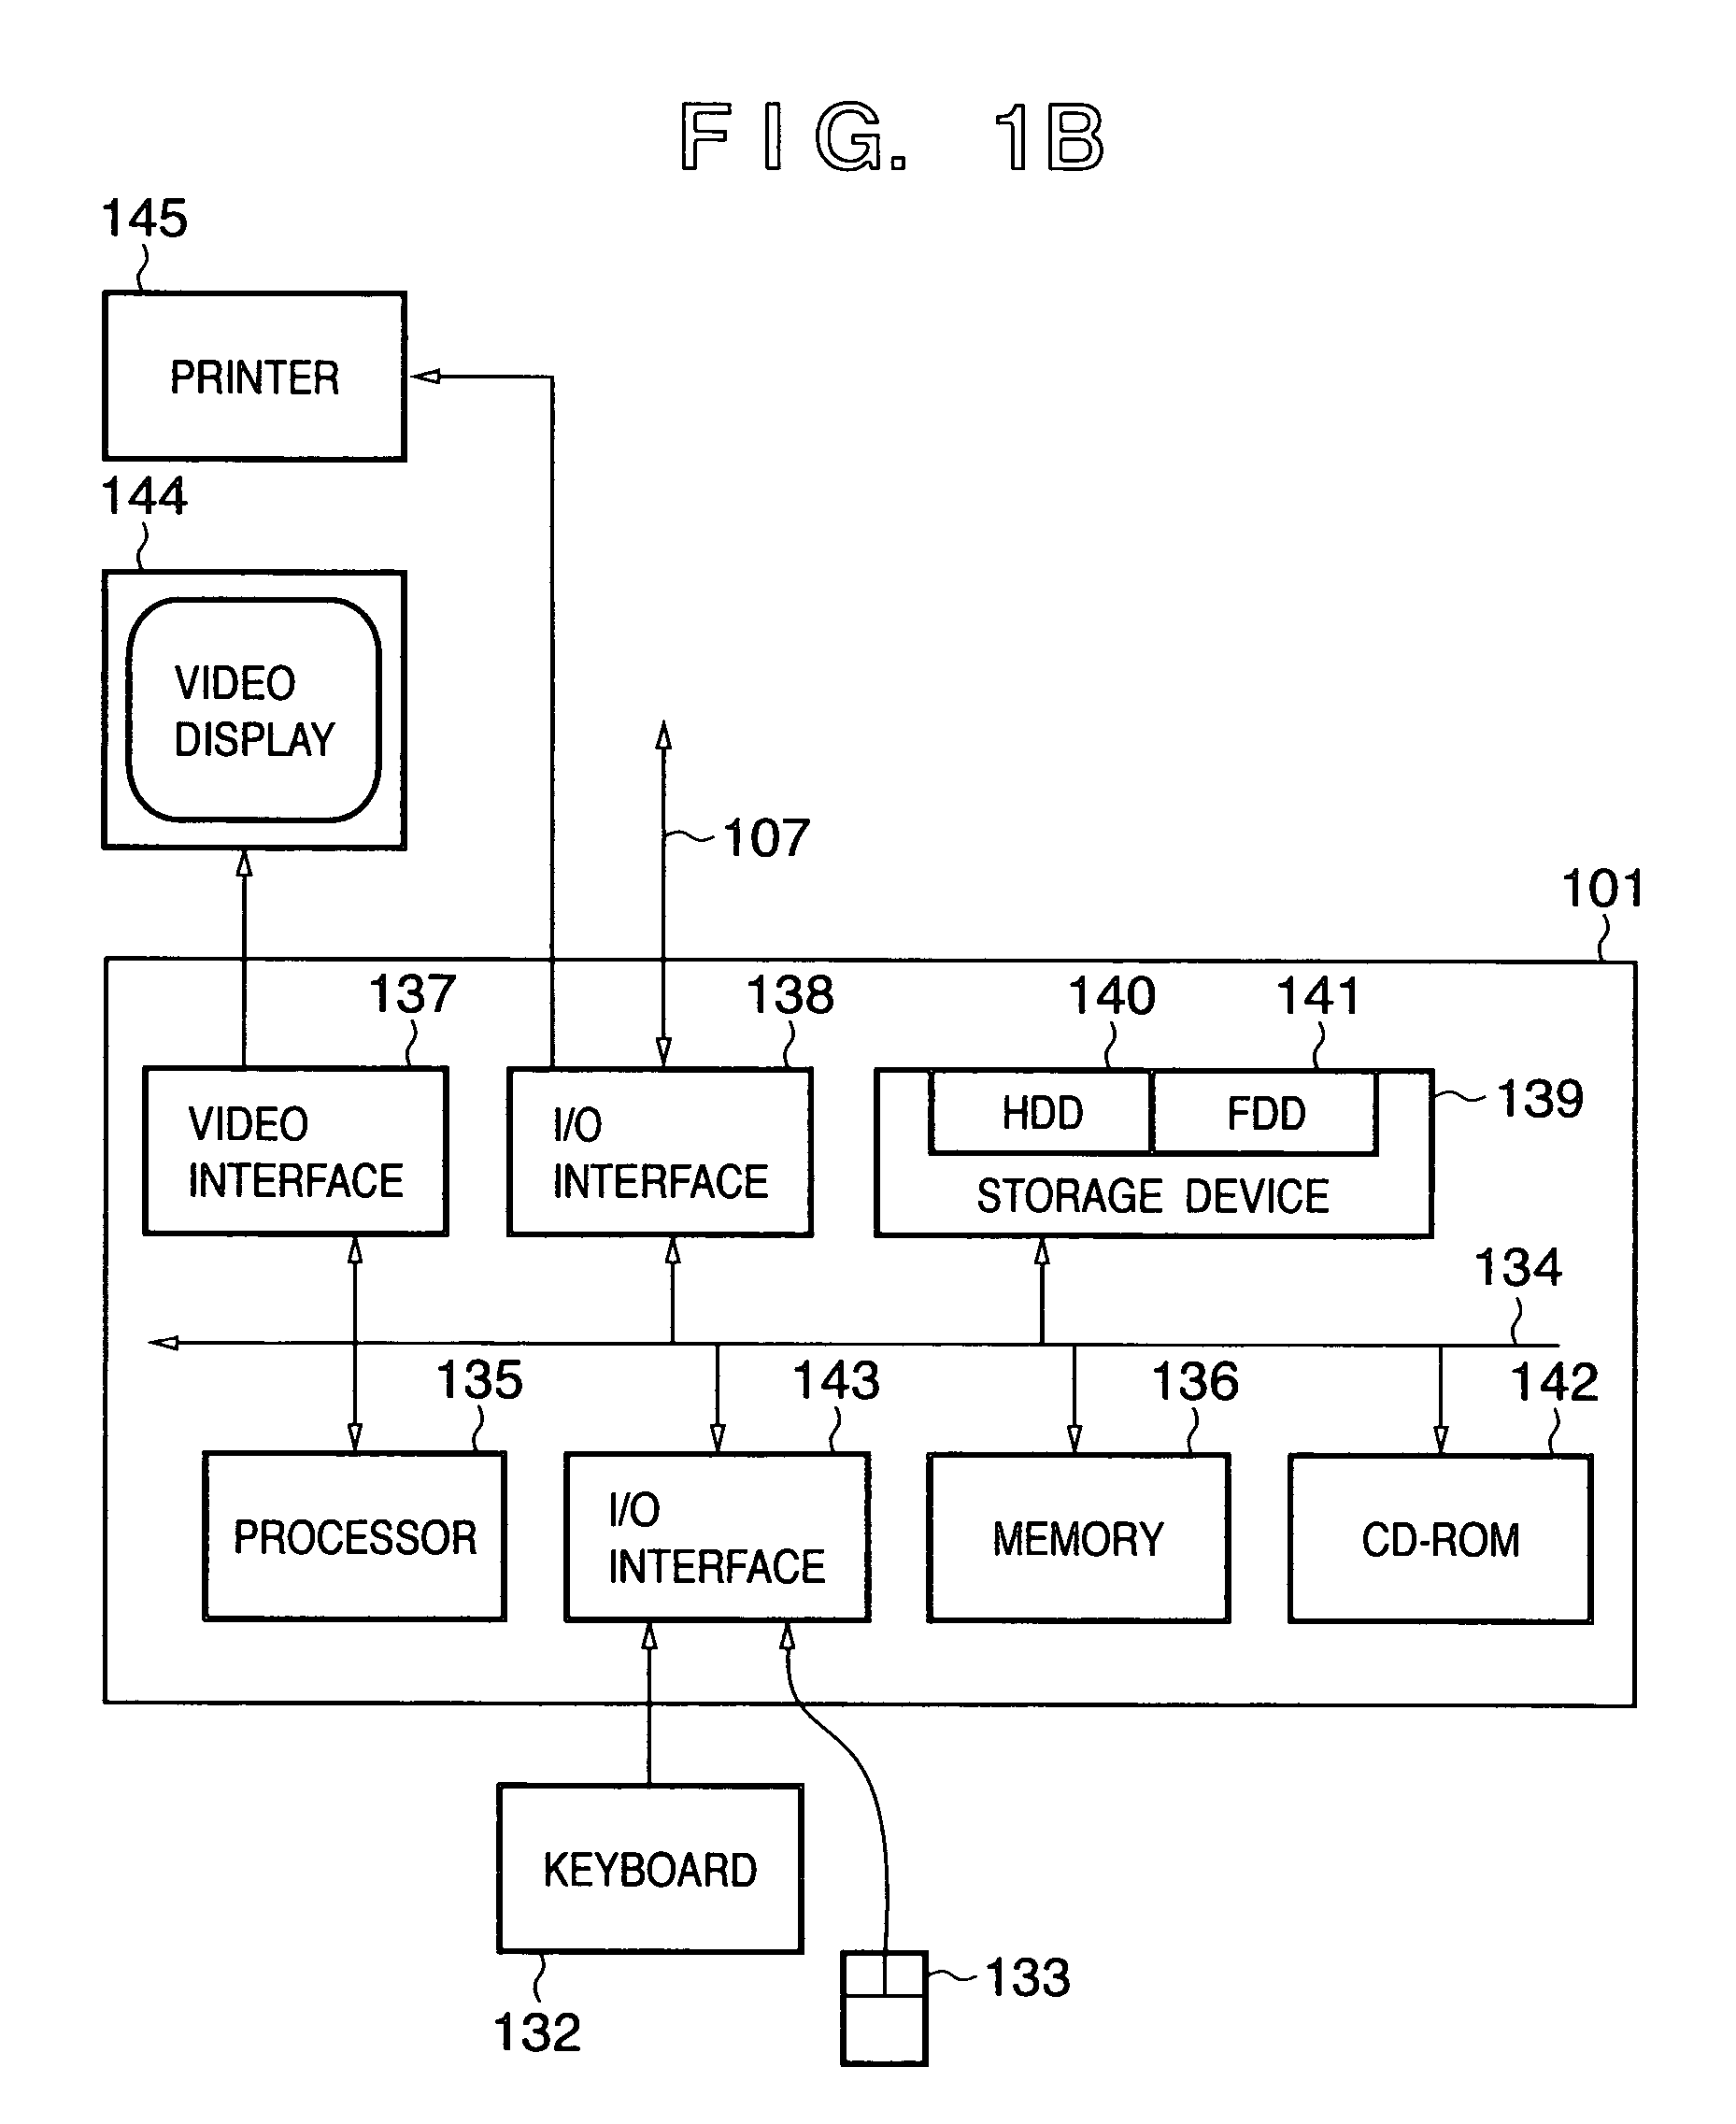 Apparatus and method for automatically setting constraints within a document layout